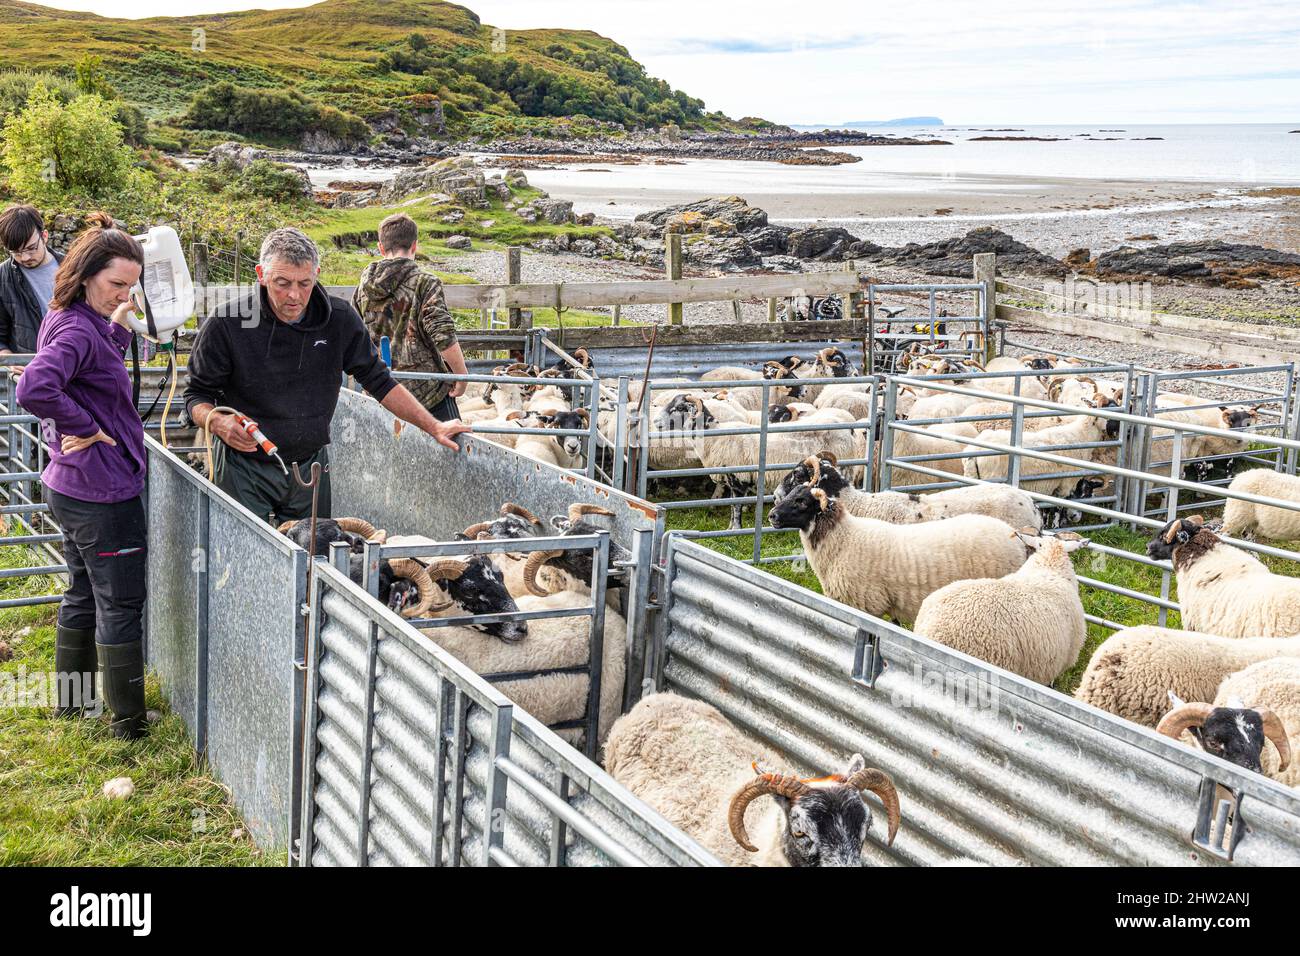 A family medicating sheep on the sea shore at the tiny hamlet of Achnacloich on Tarskavaig Bay on the Sleat Peninsula in the south of the Isle of Skye Stock Photo